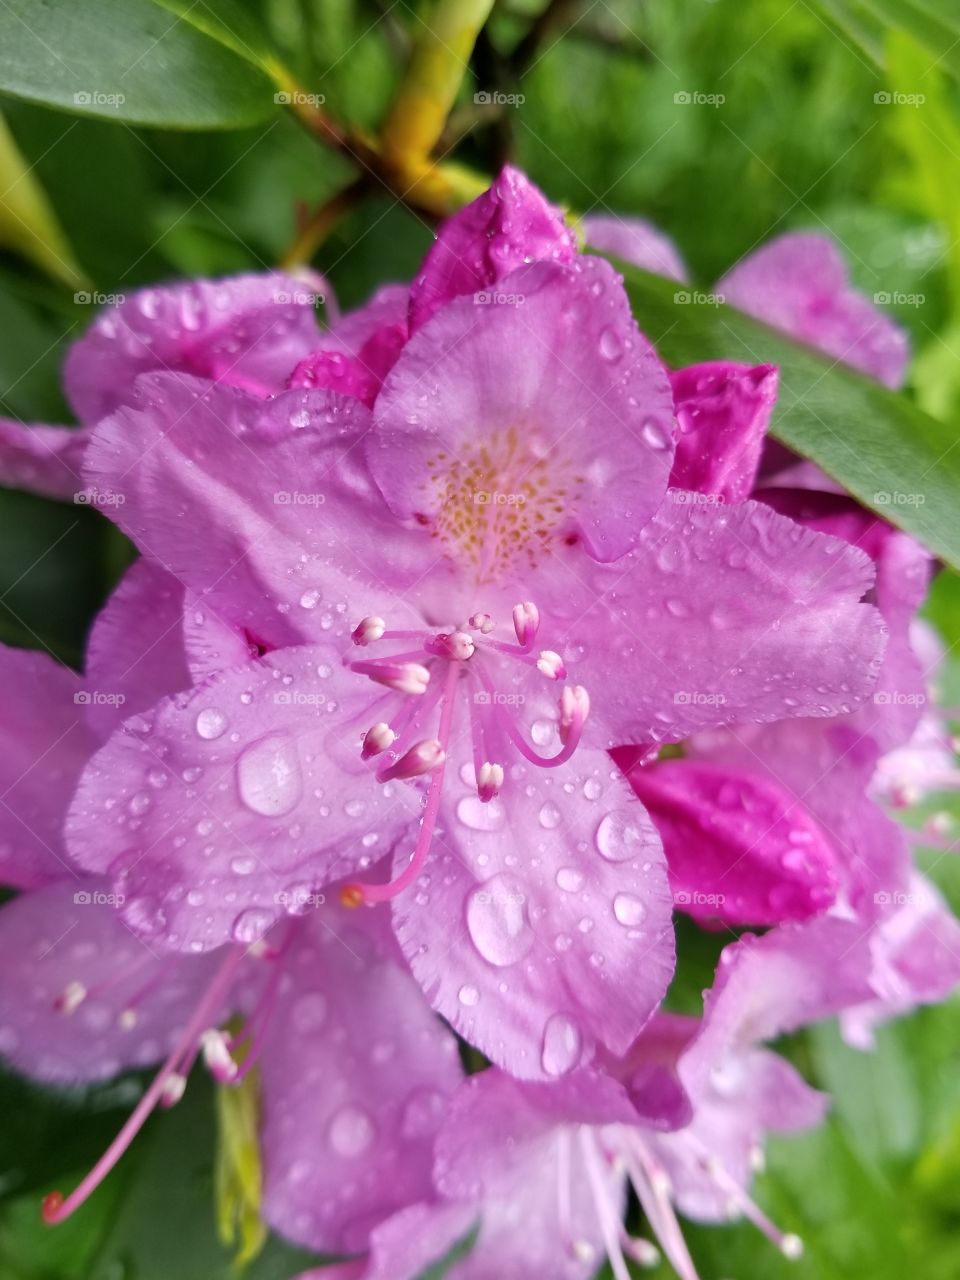 Clear raindrops sitting on my dark and pink petals helping me grow.